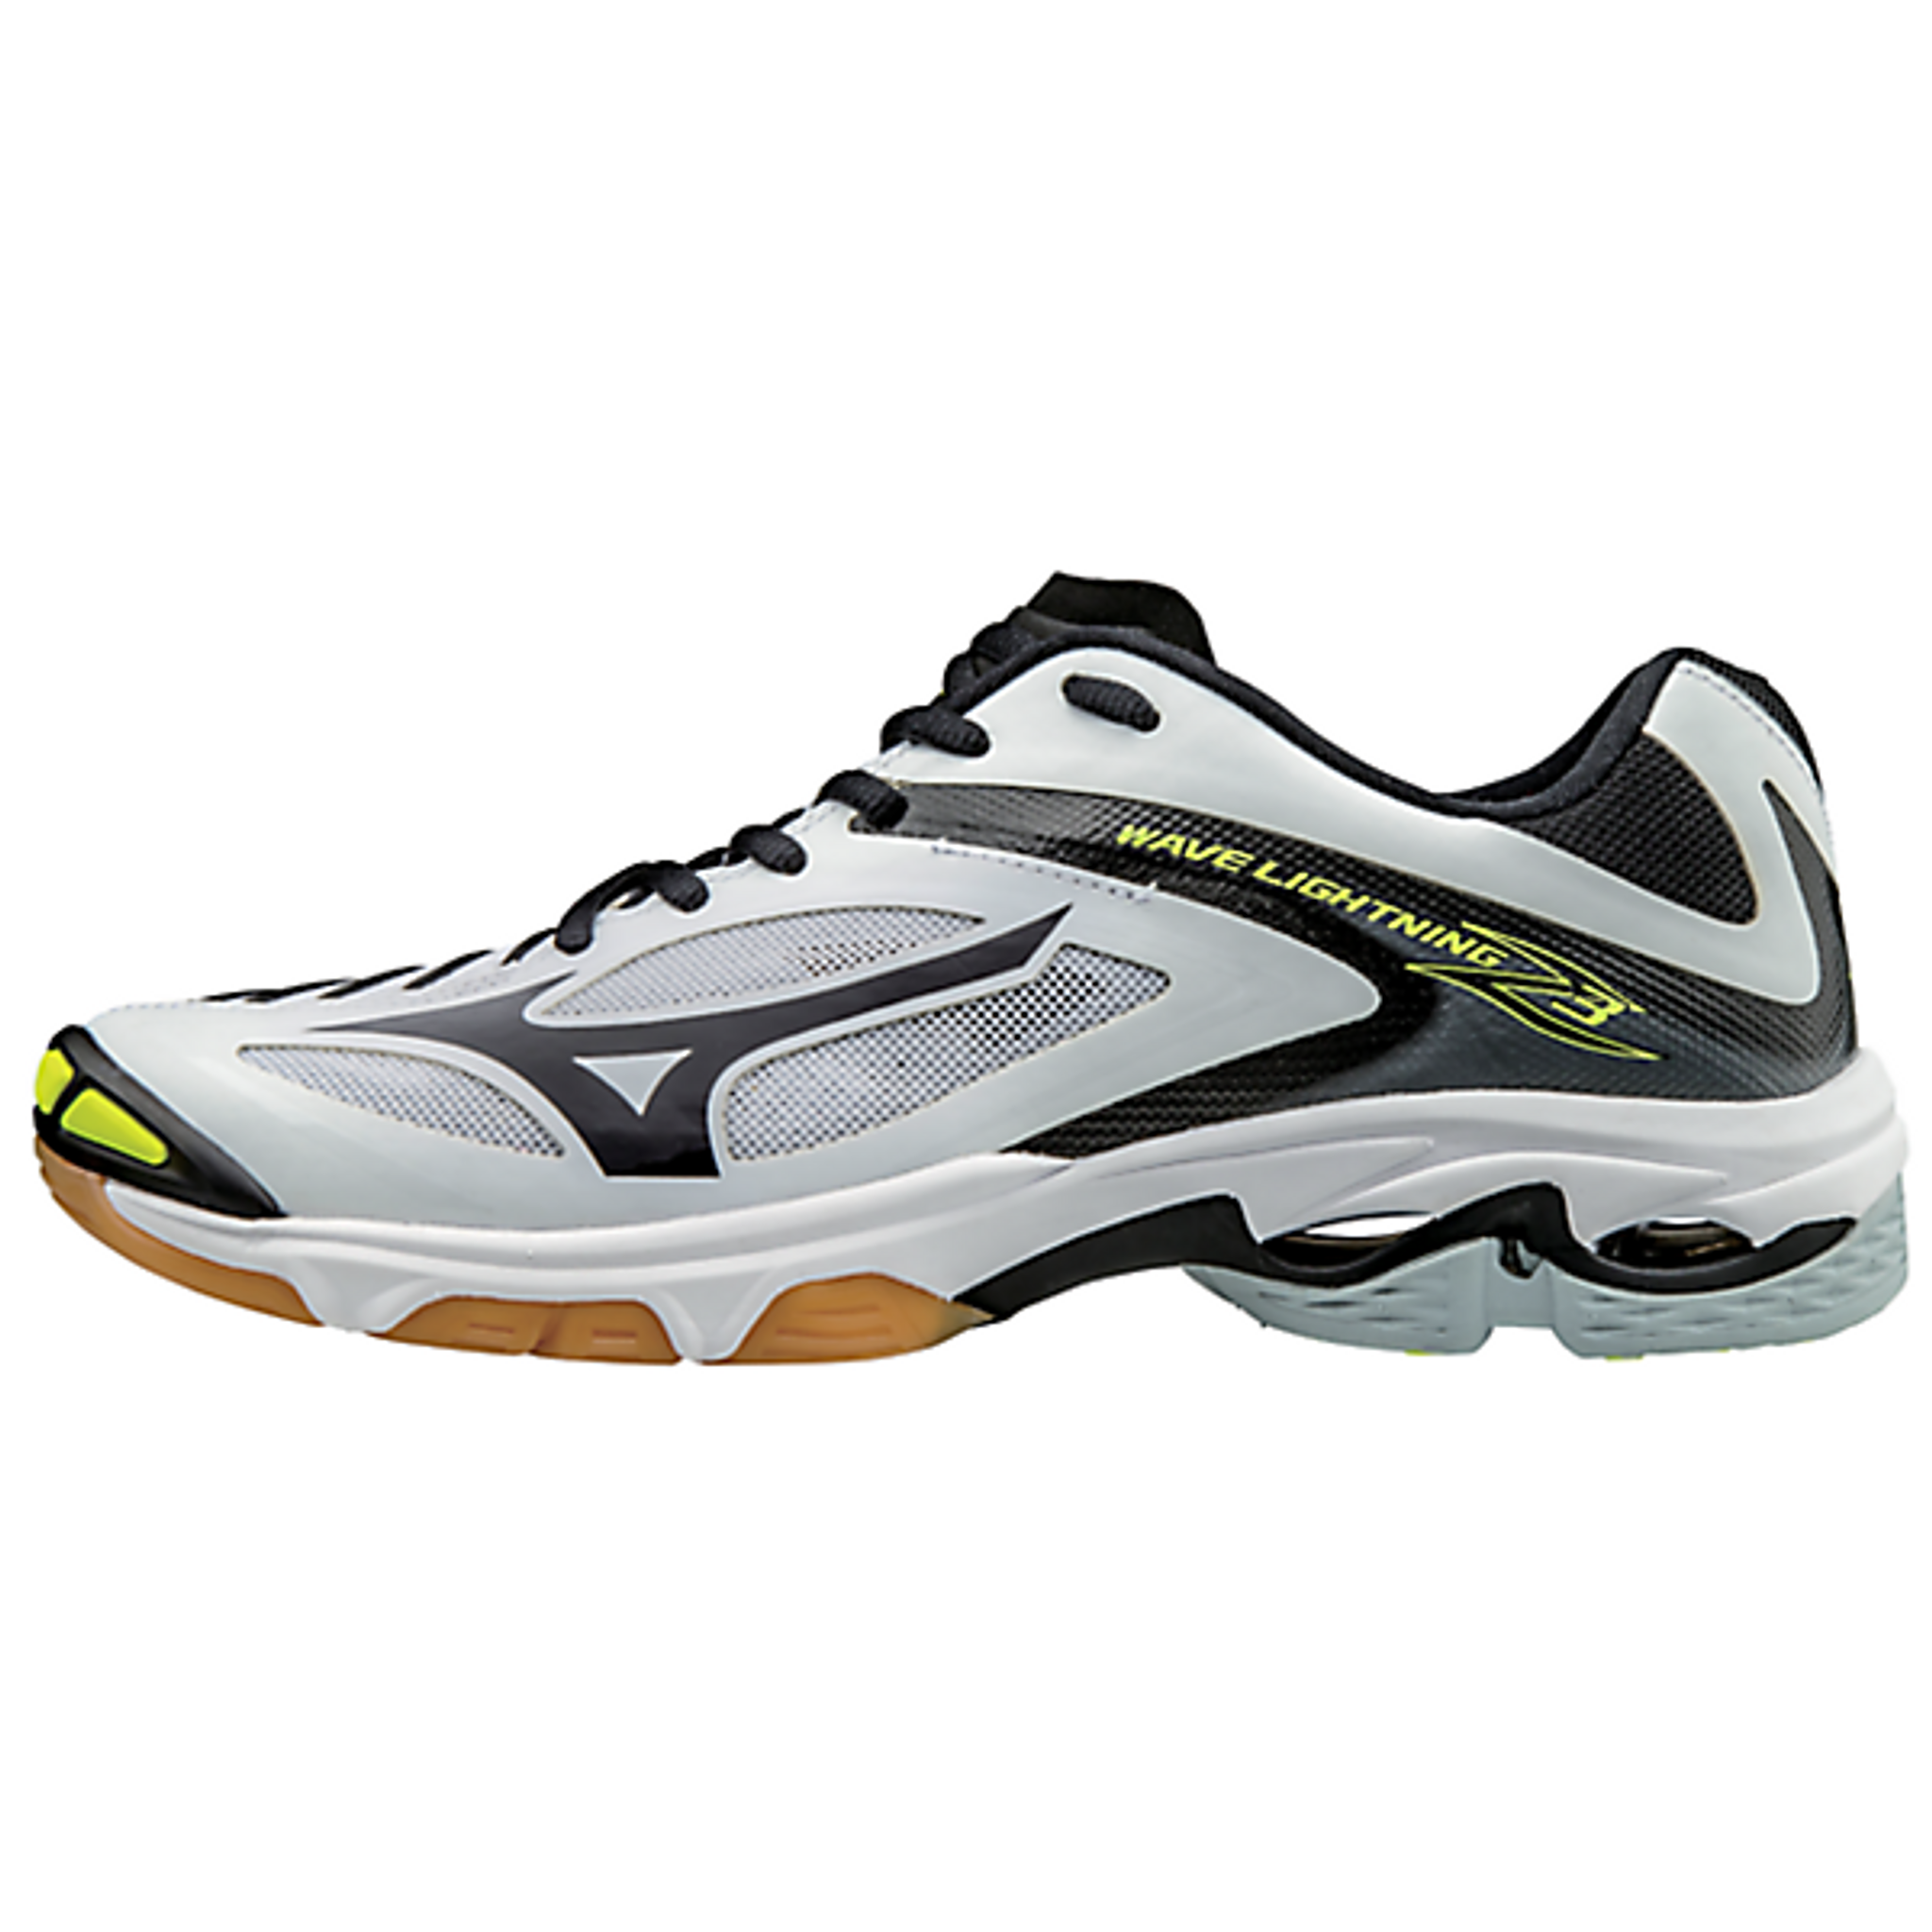 youth mizuno volleyball shoes, OFF 77%,Buy!